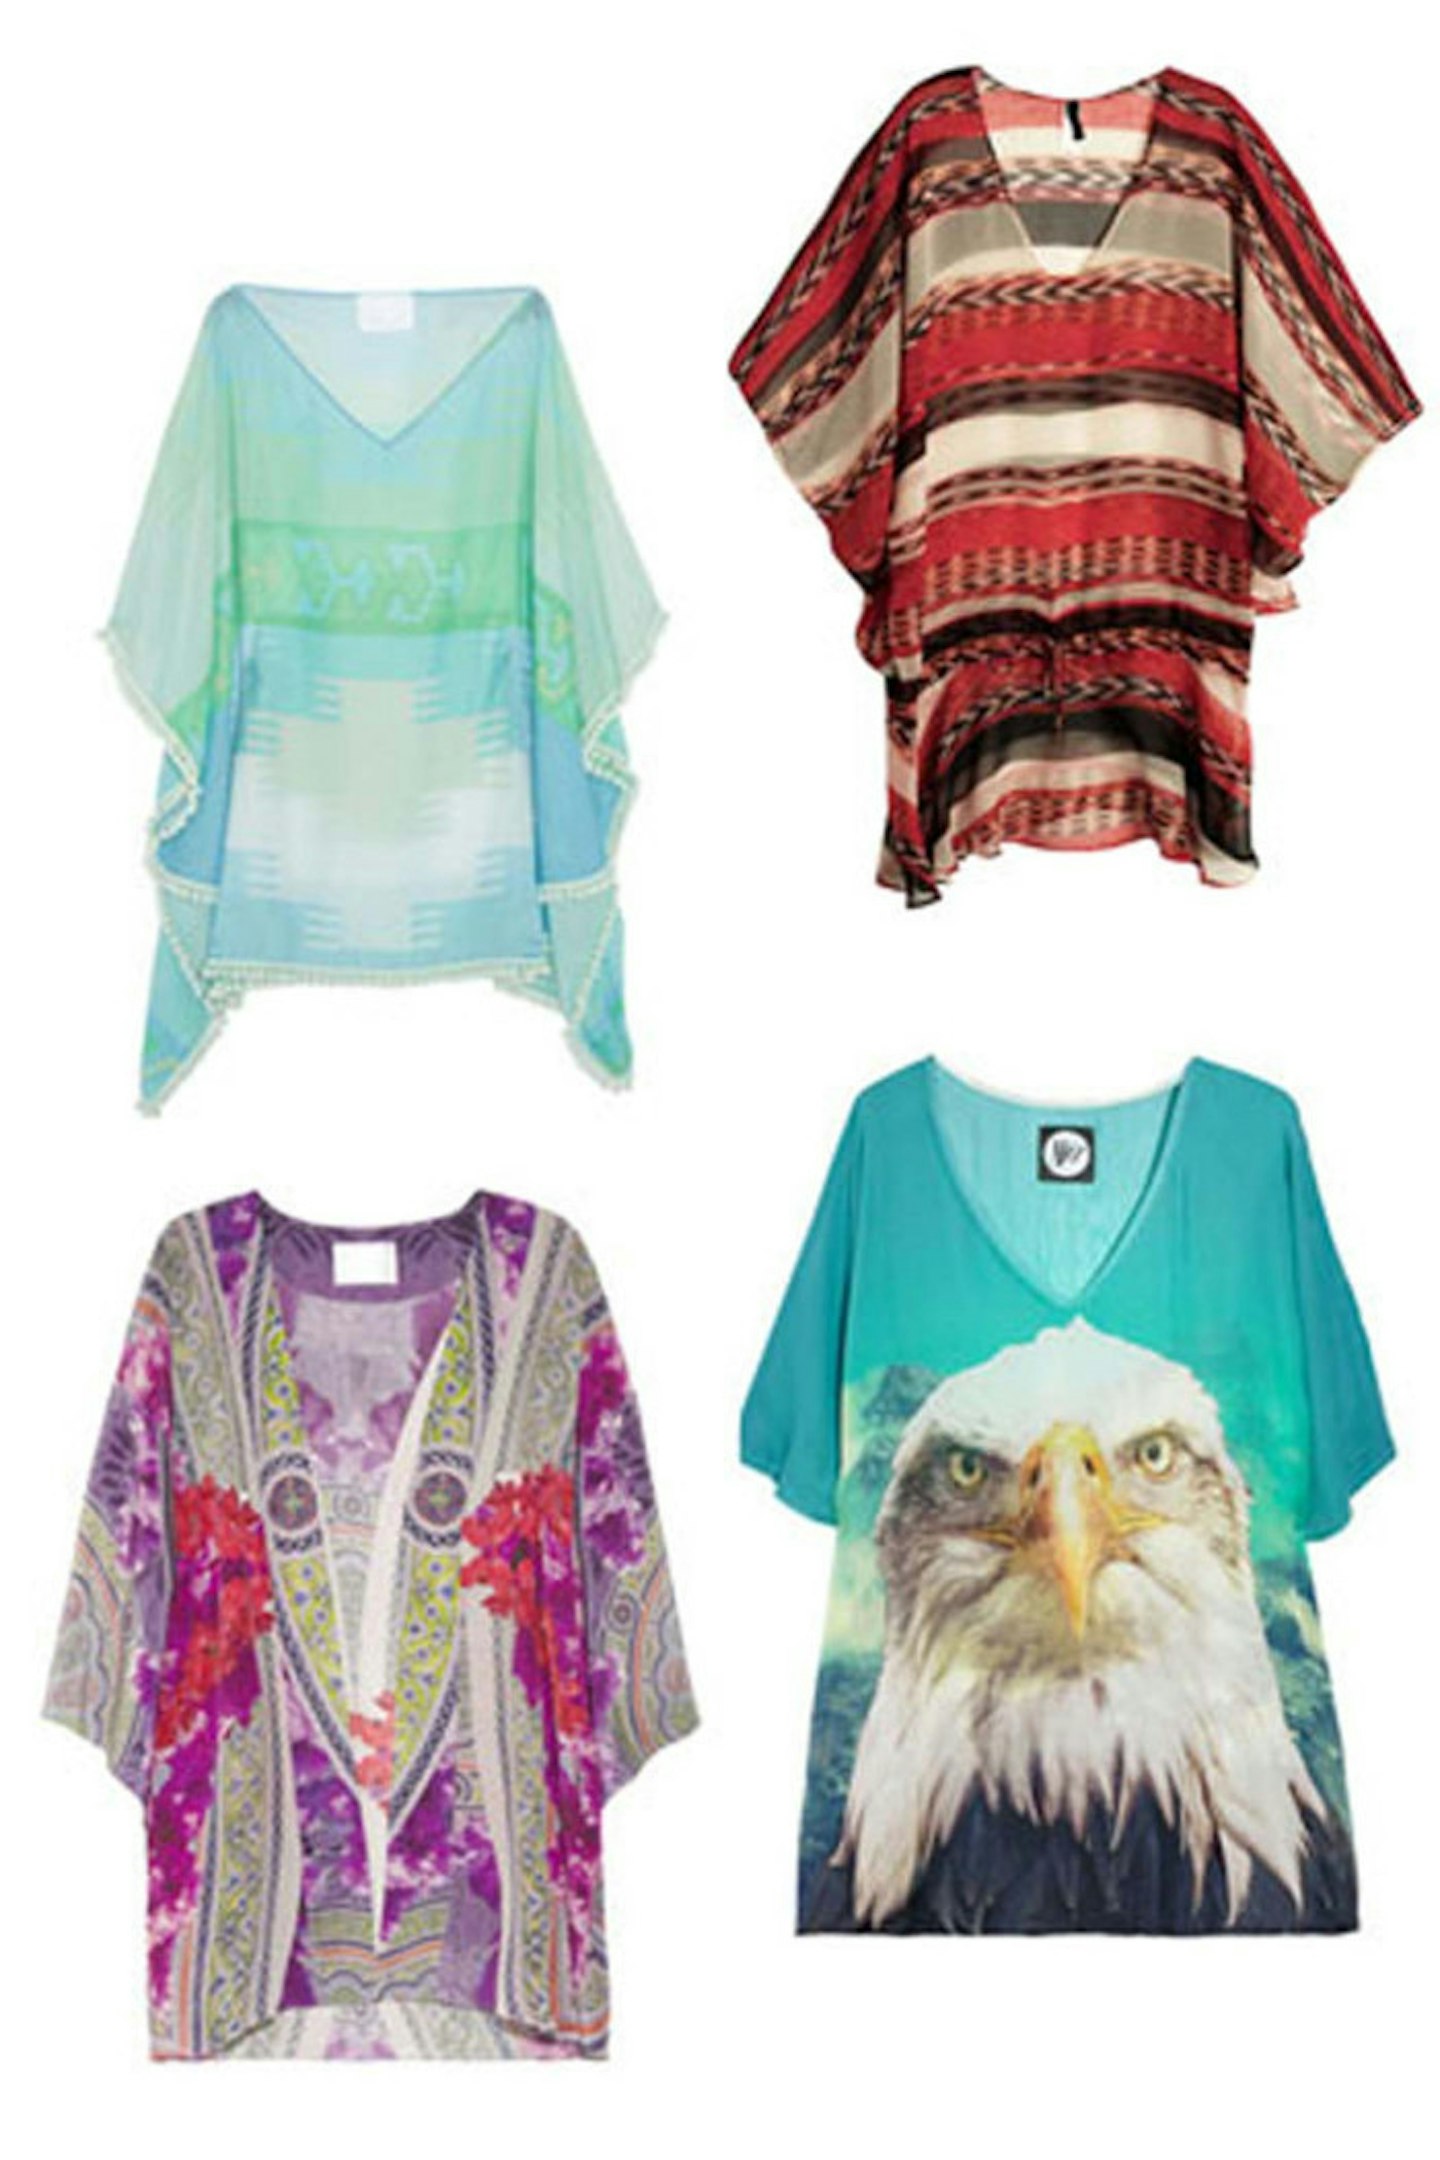 GALLERY >> Click through to view our top 50 kaftans...